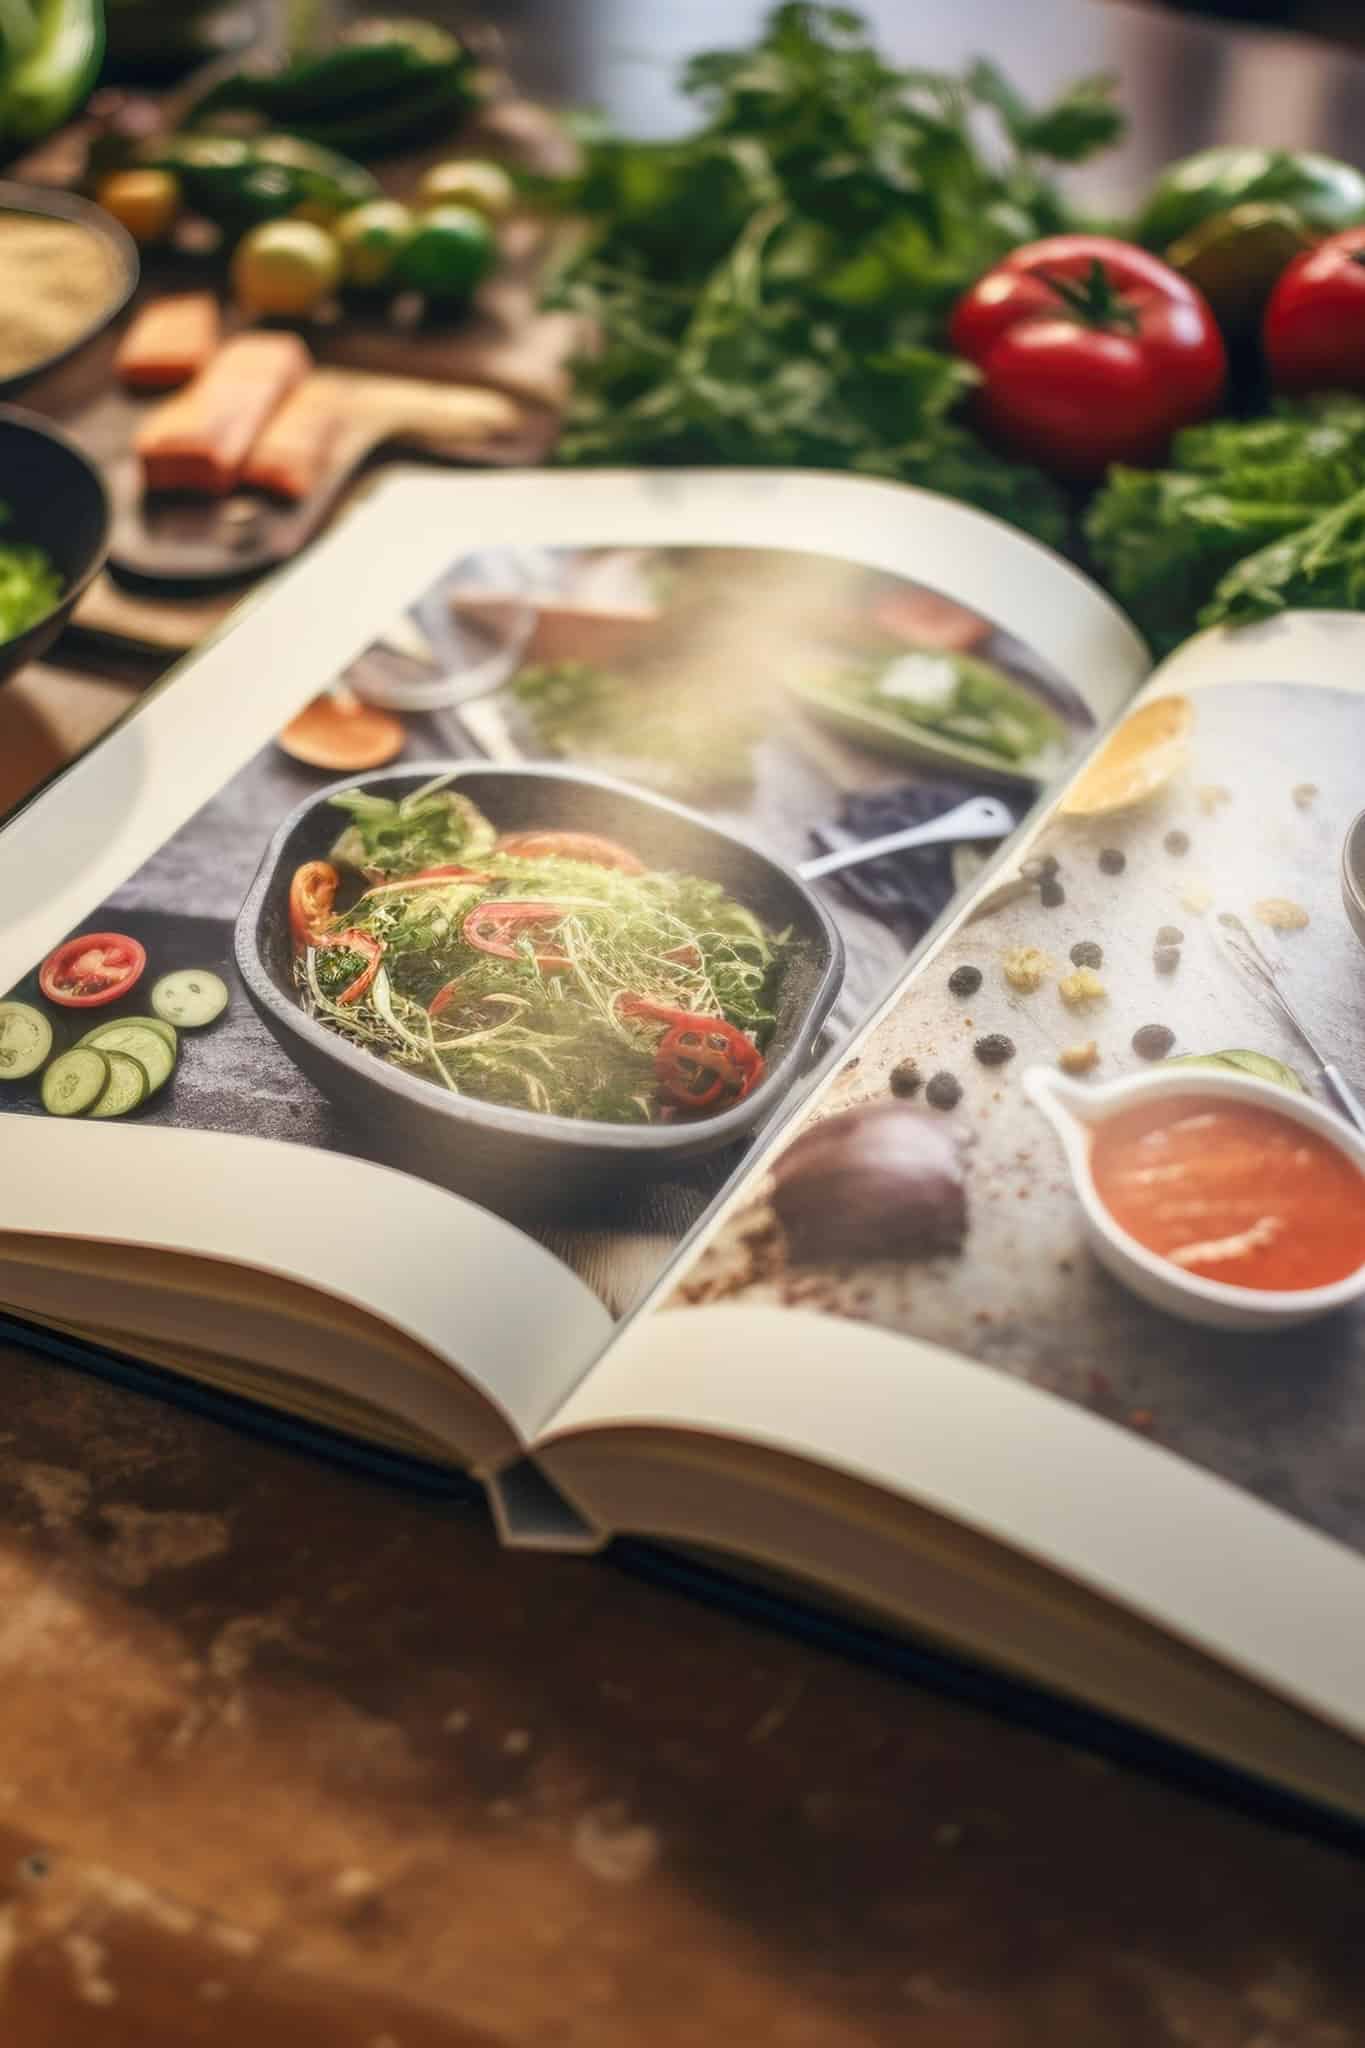 A cookbook open on a table surrounded by a variety of ingredients.